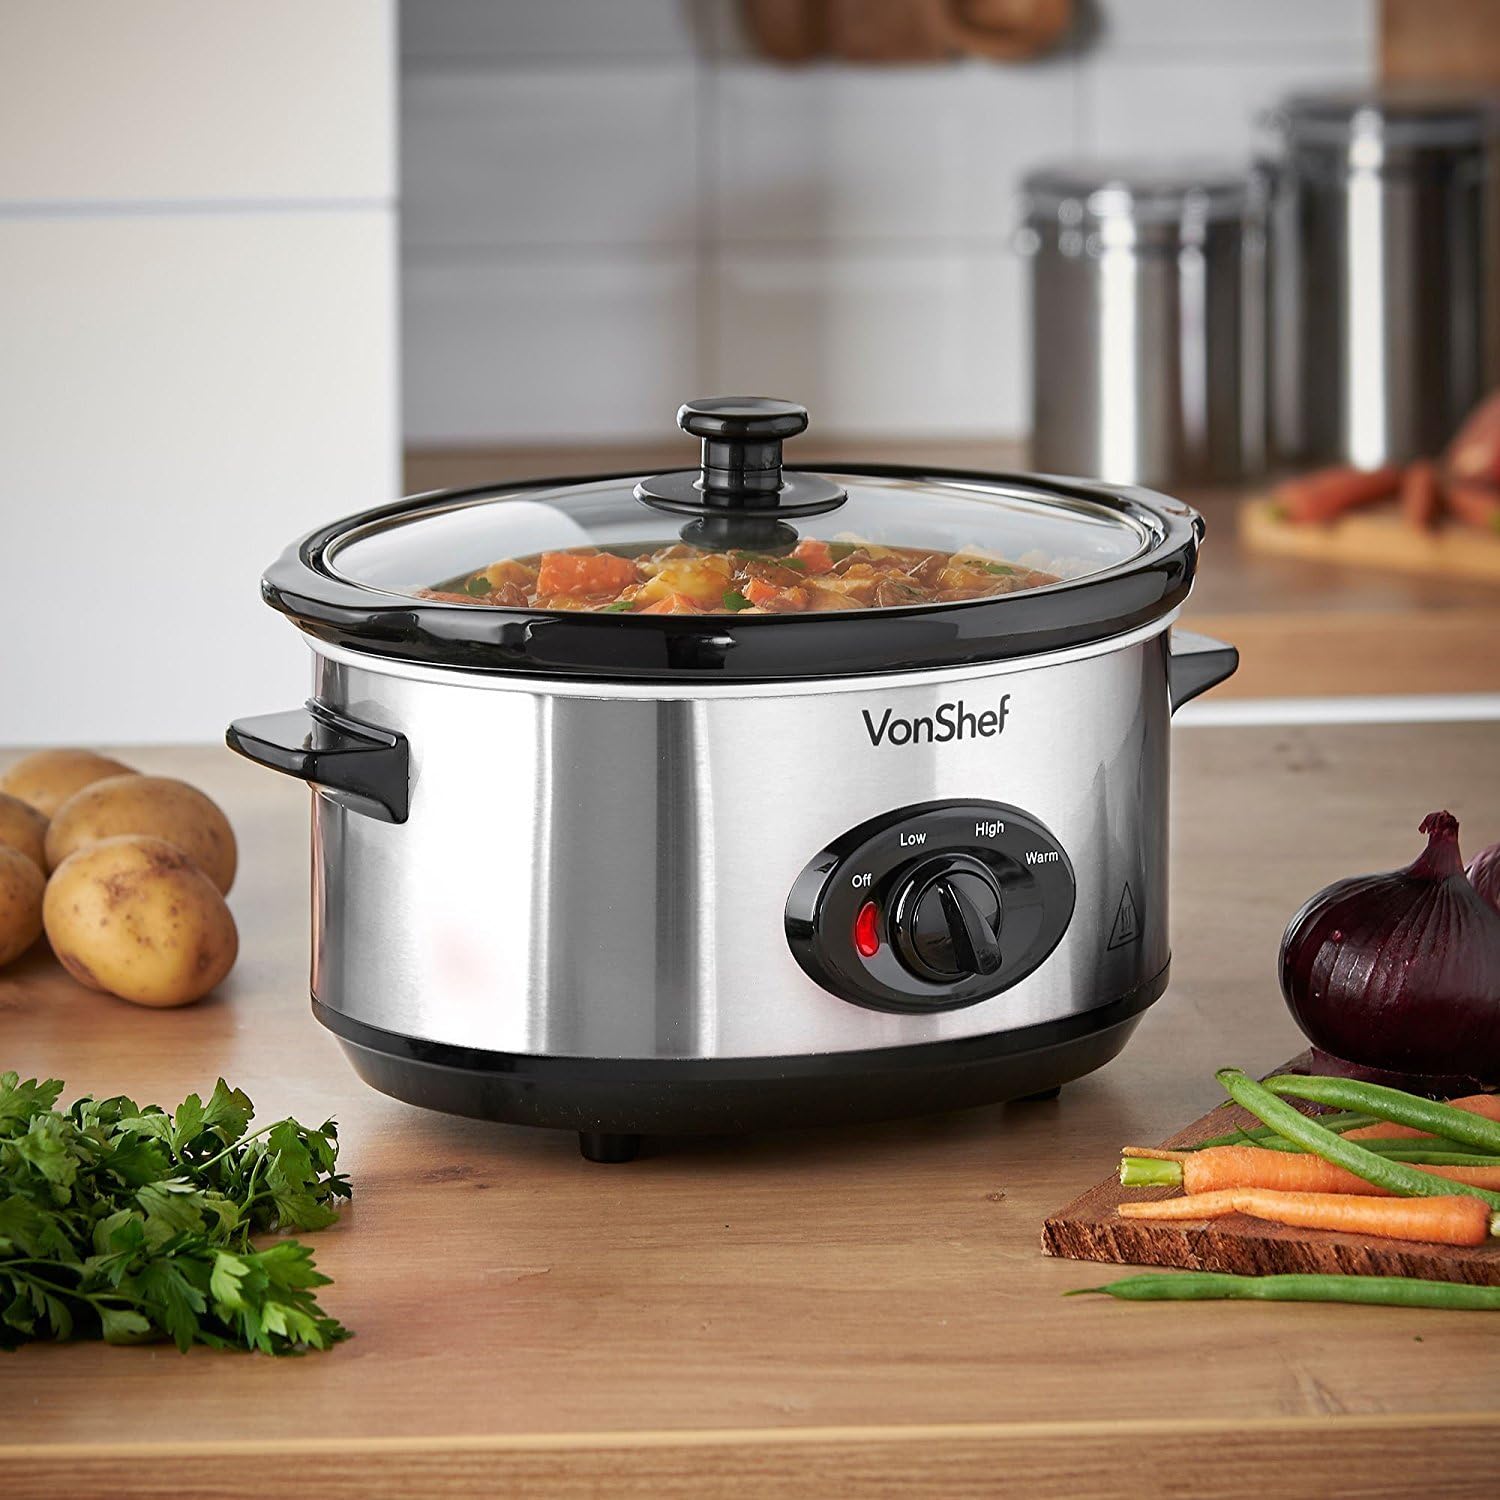 Morphy Richards 220 240 volts Slow Cooker with Large 3.5 Liter